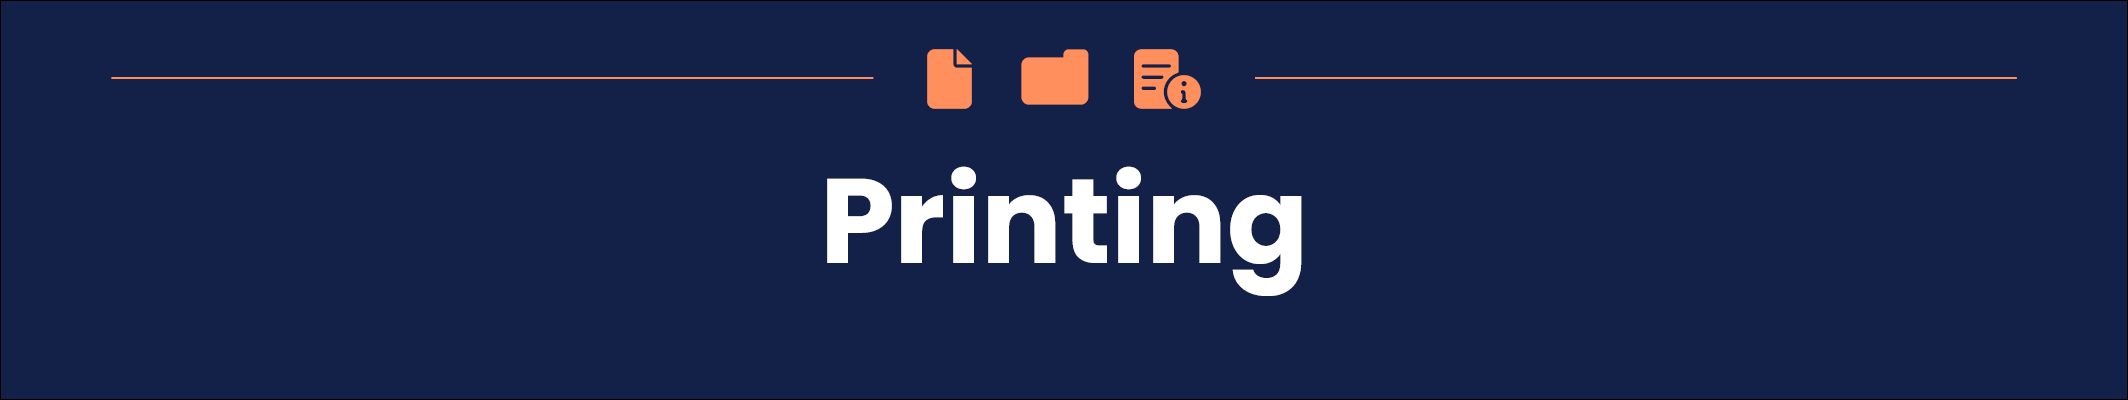 Printing in white letters on a dark blue background